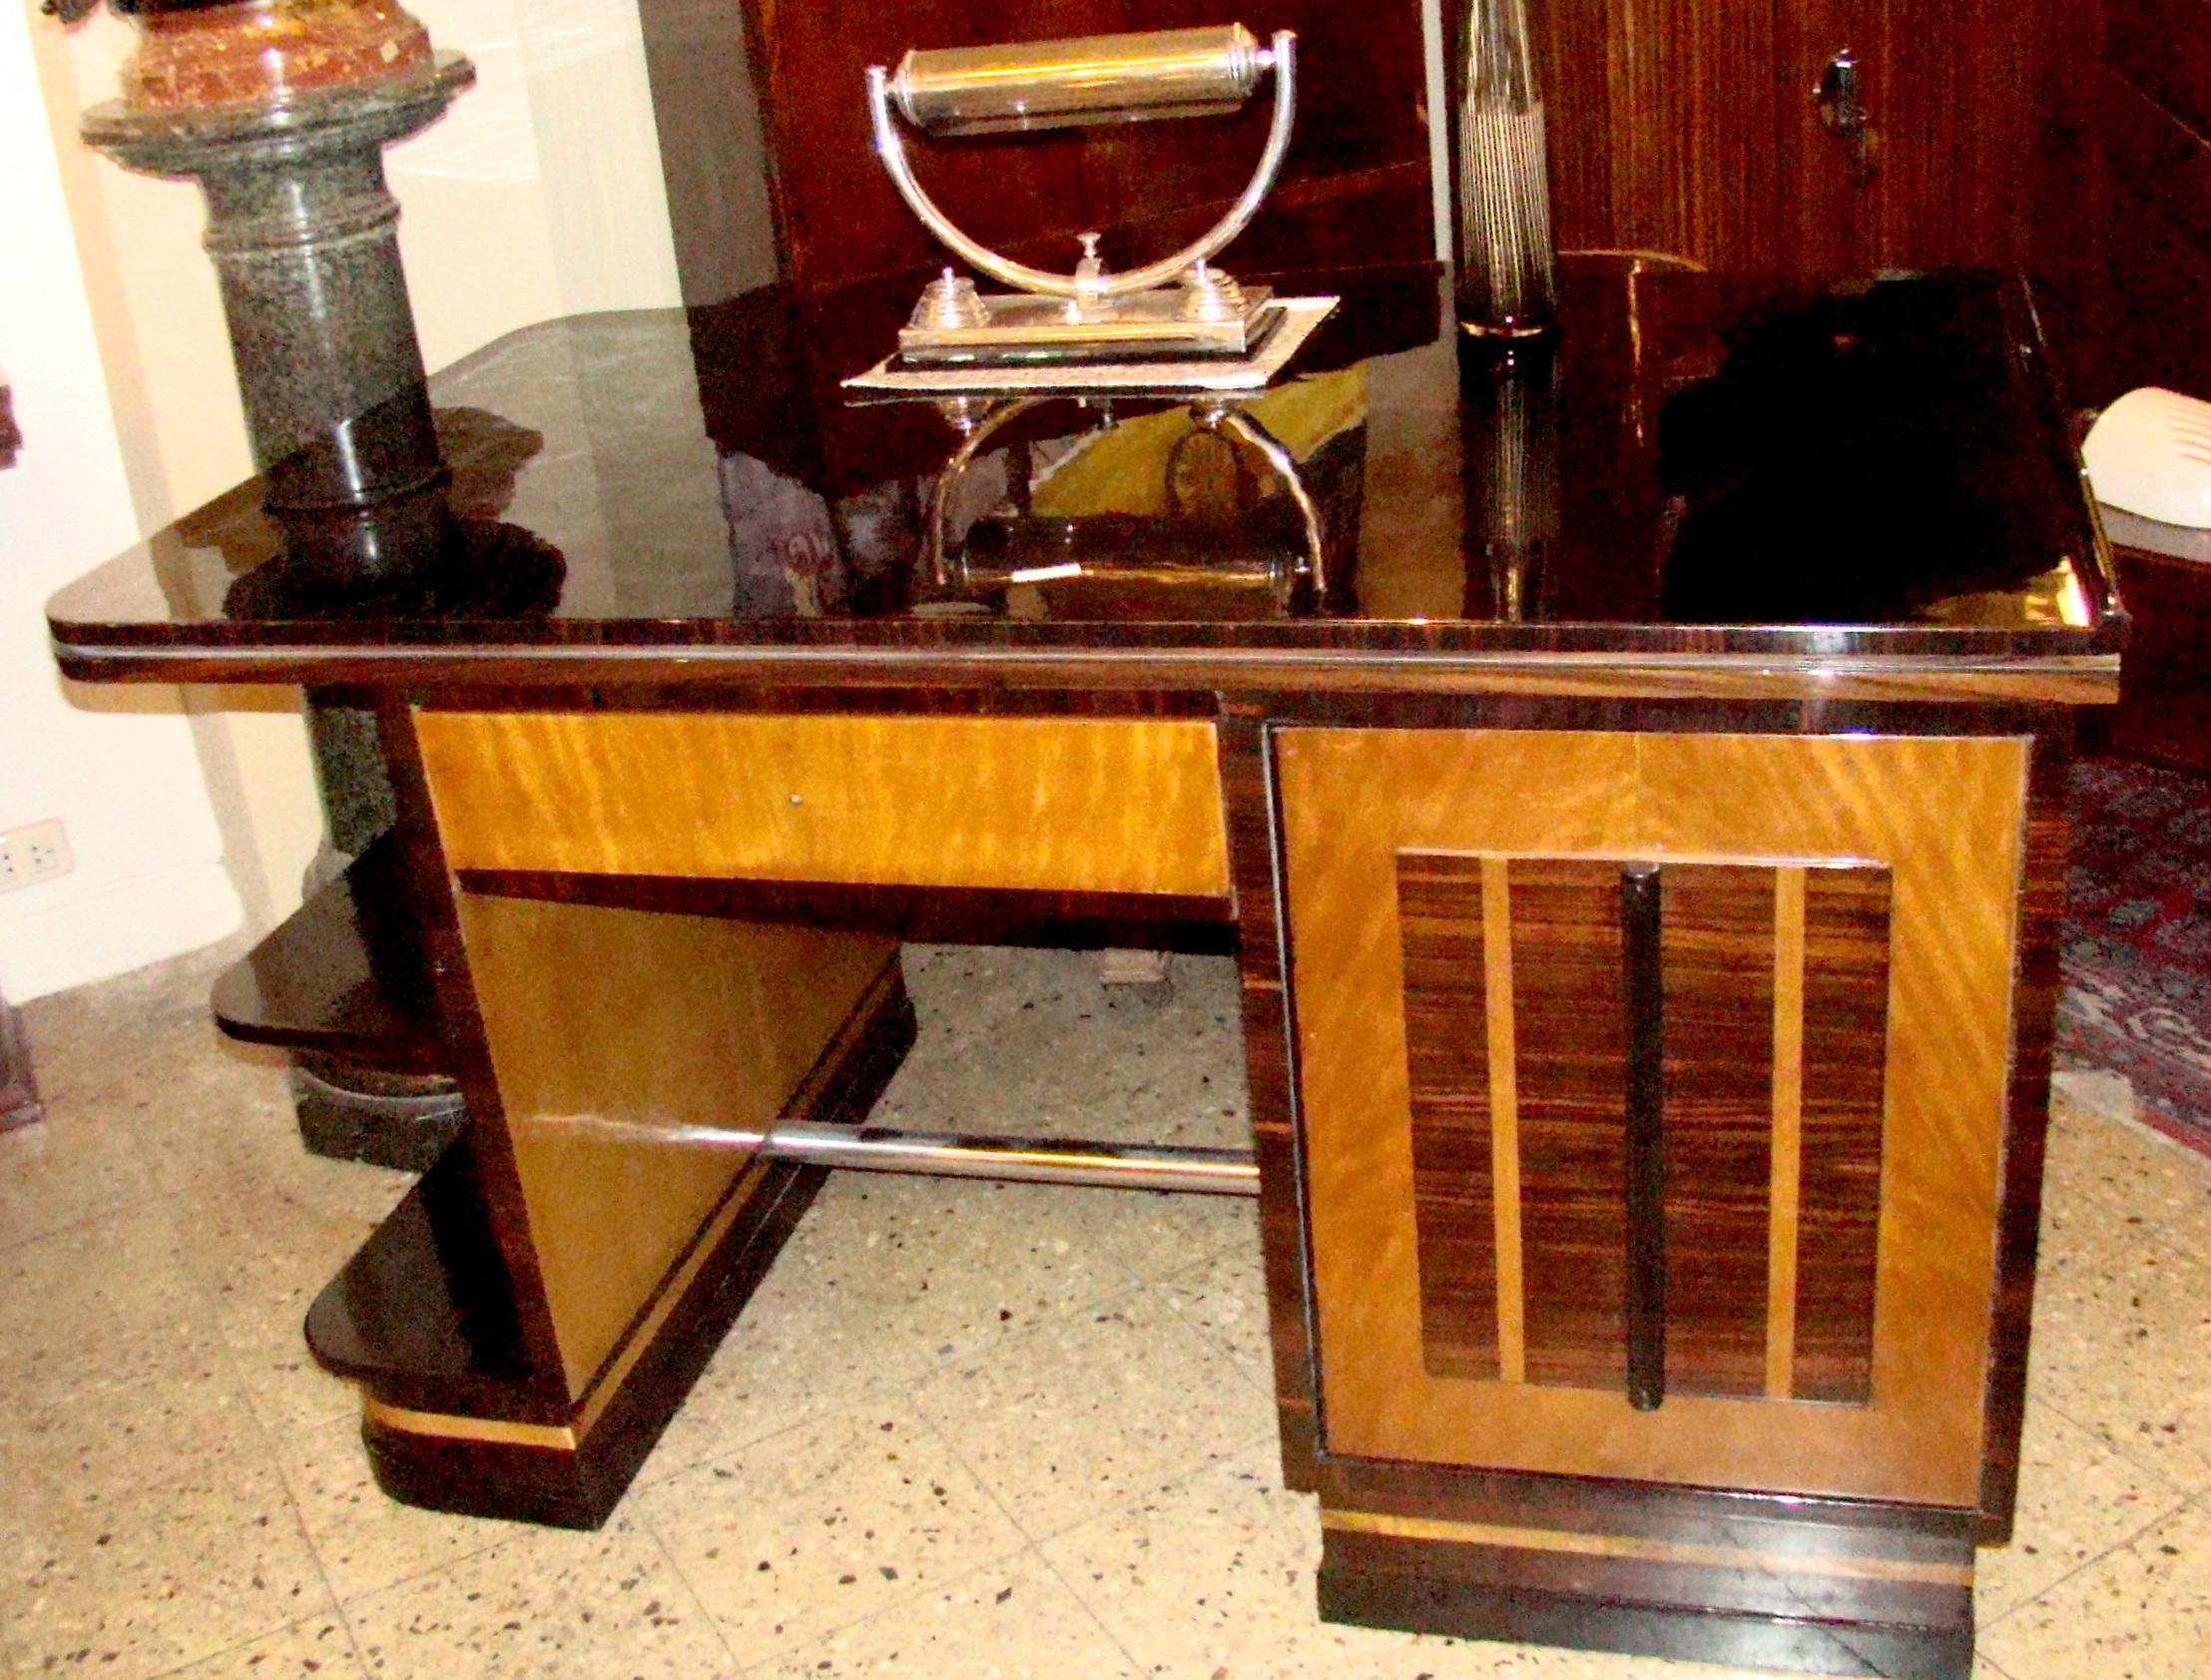 French desk style: Art Deco
Year 1920
Material: Wood and chrome
It is an elegant and sophisticated dream desk. 
The quality of the furniture and the exotic wood used make it unique. It is an icon of distinction.
You want to live in the golden years,